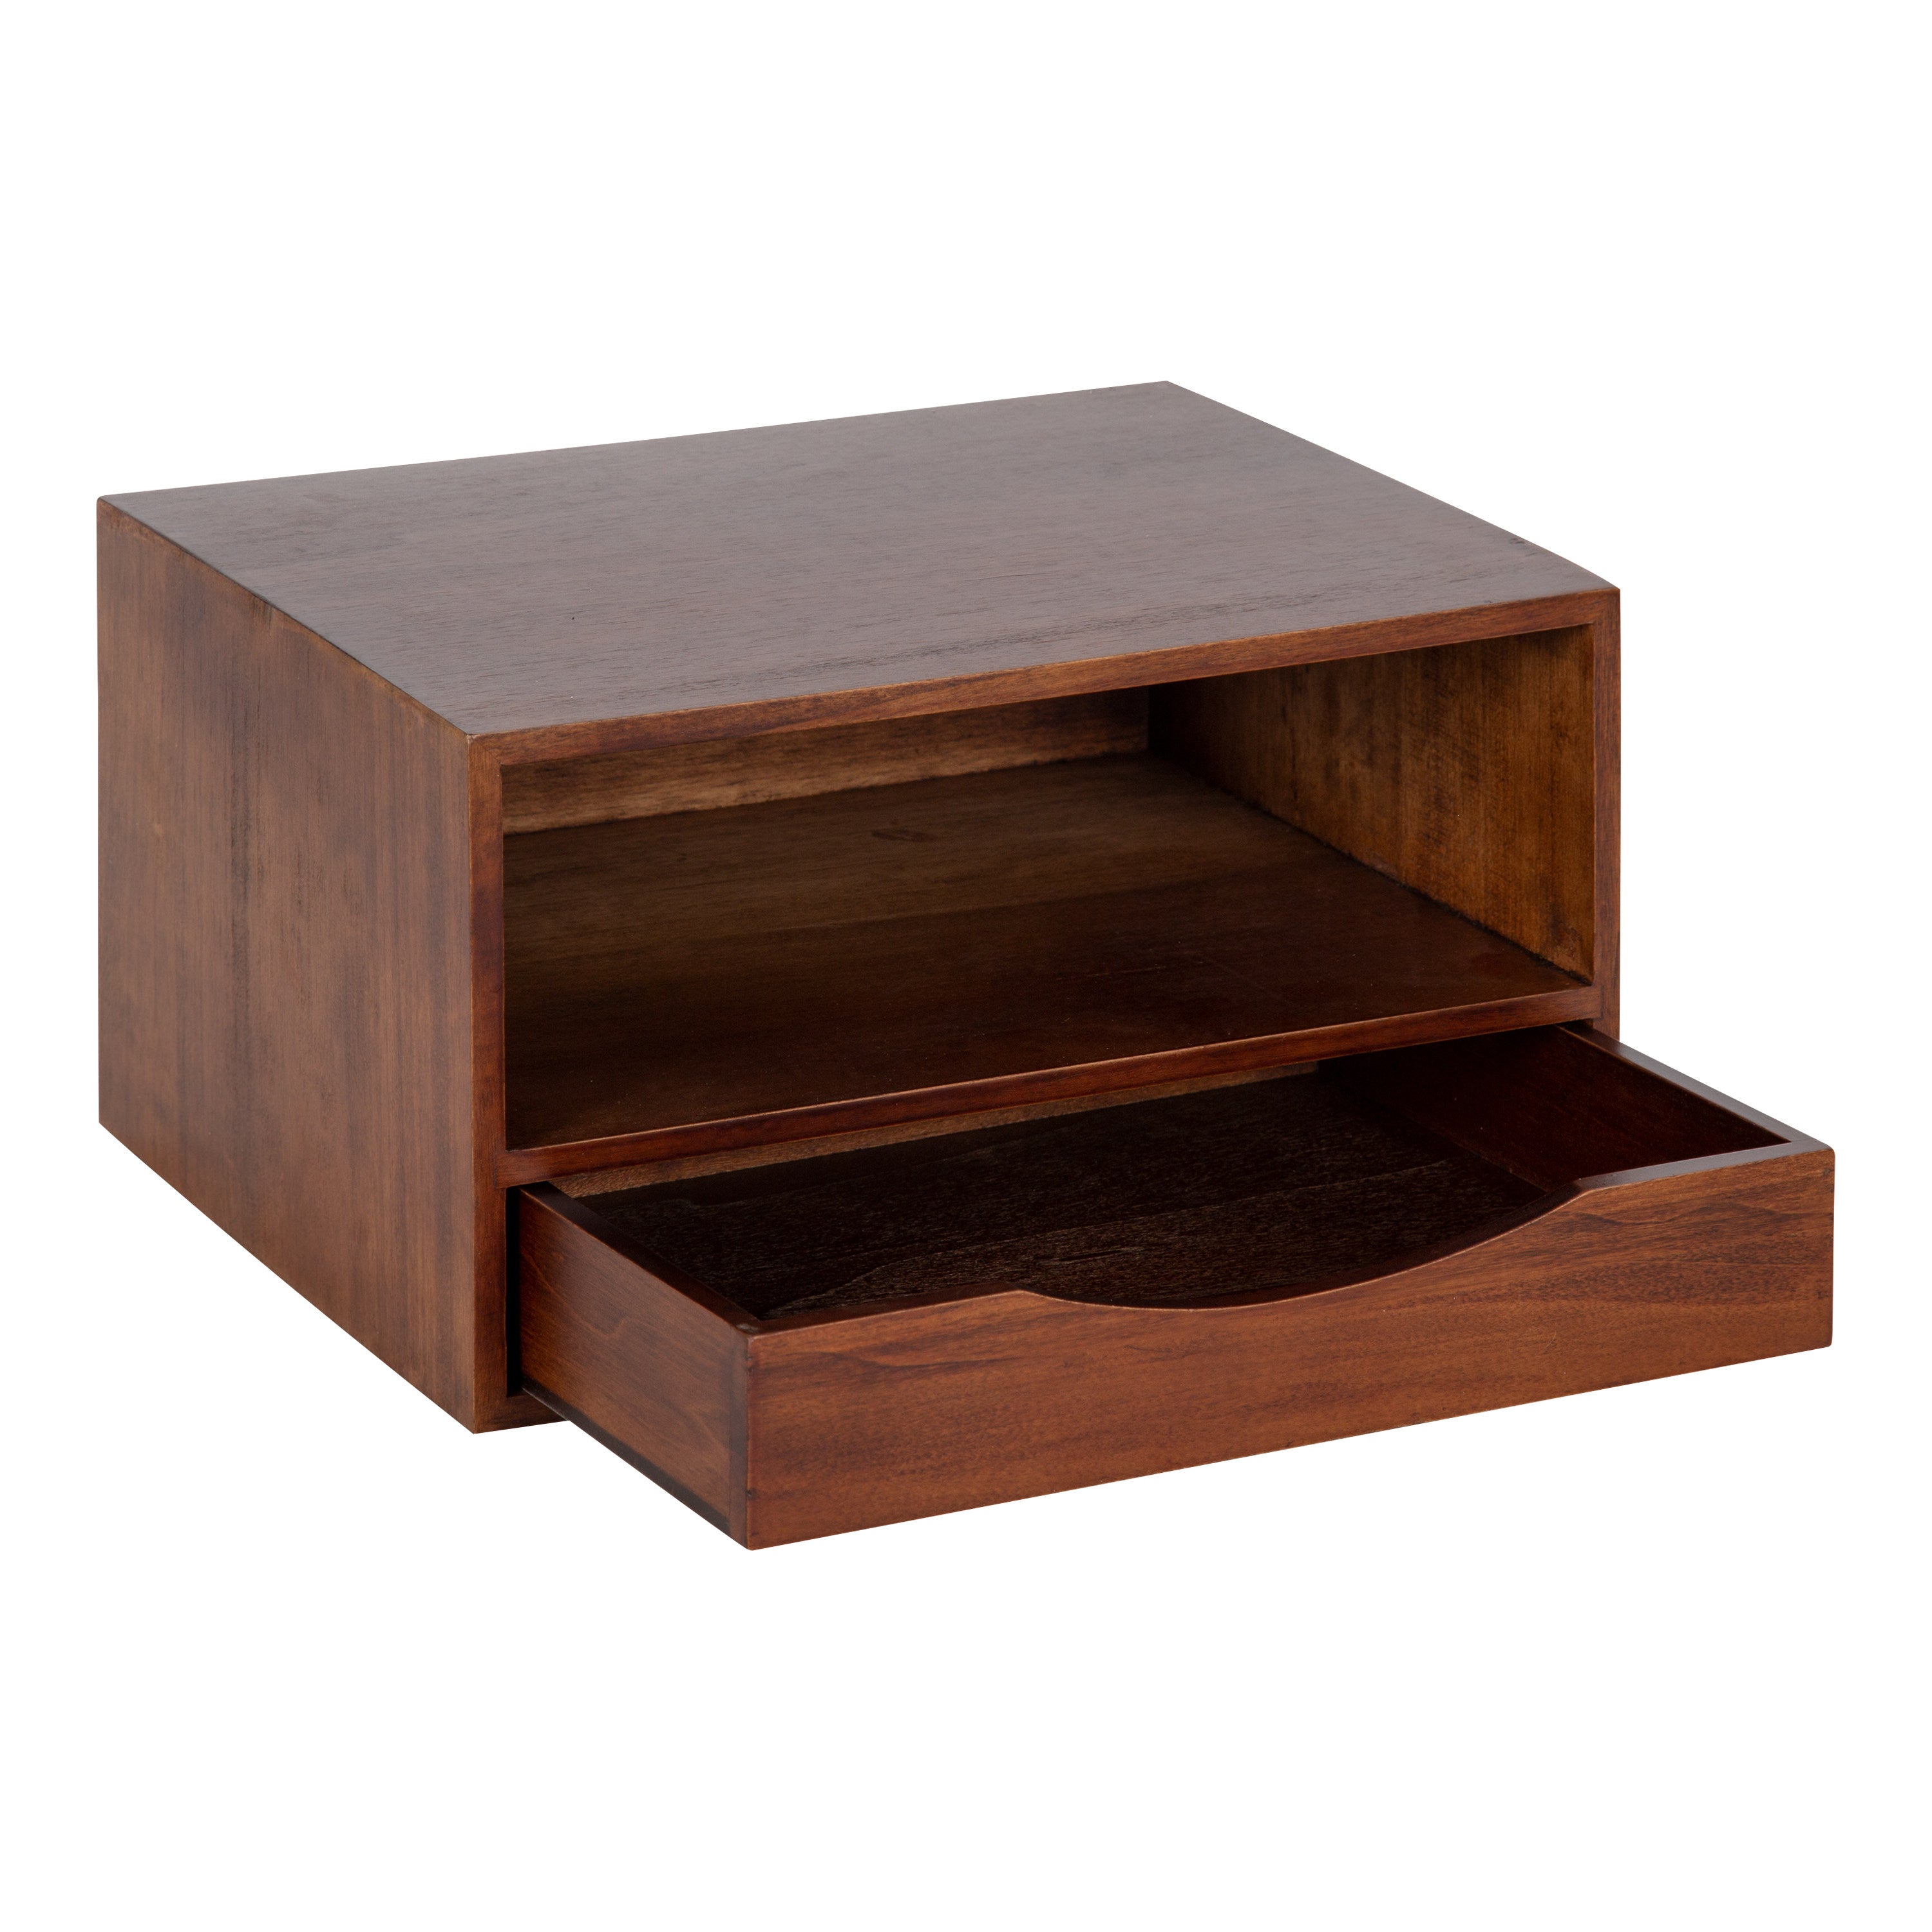 Hutton Floating Wall Shelf with Drawer